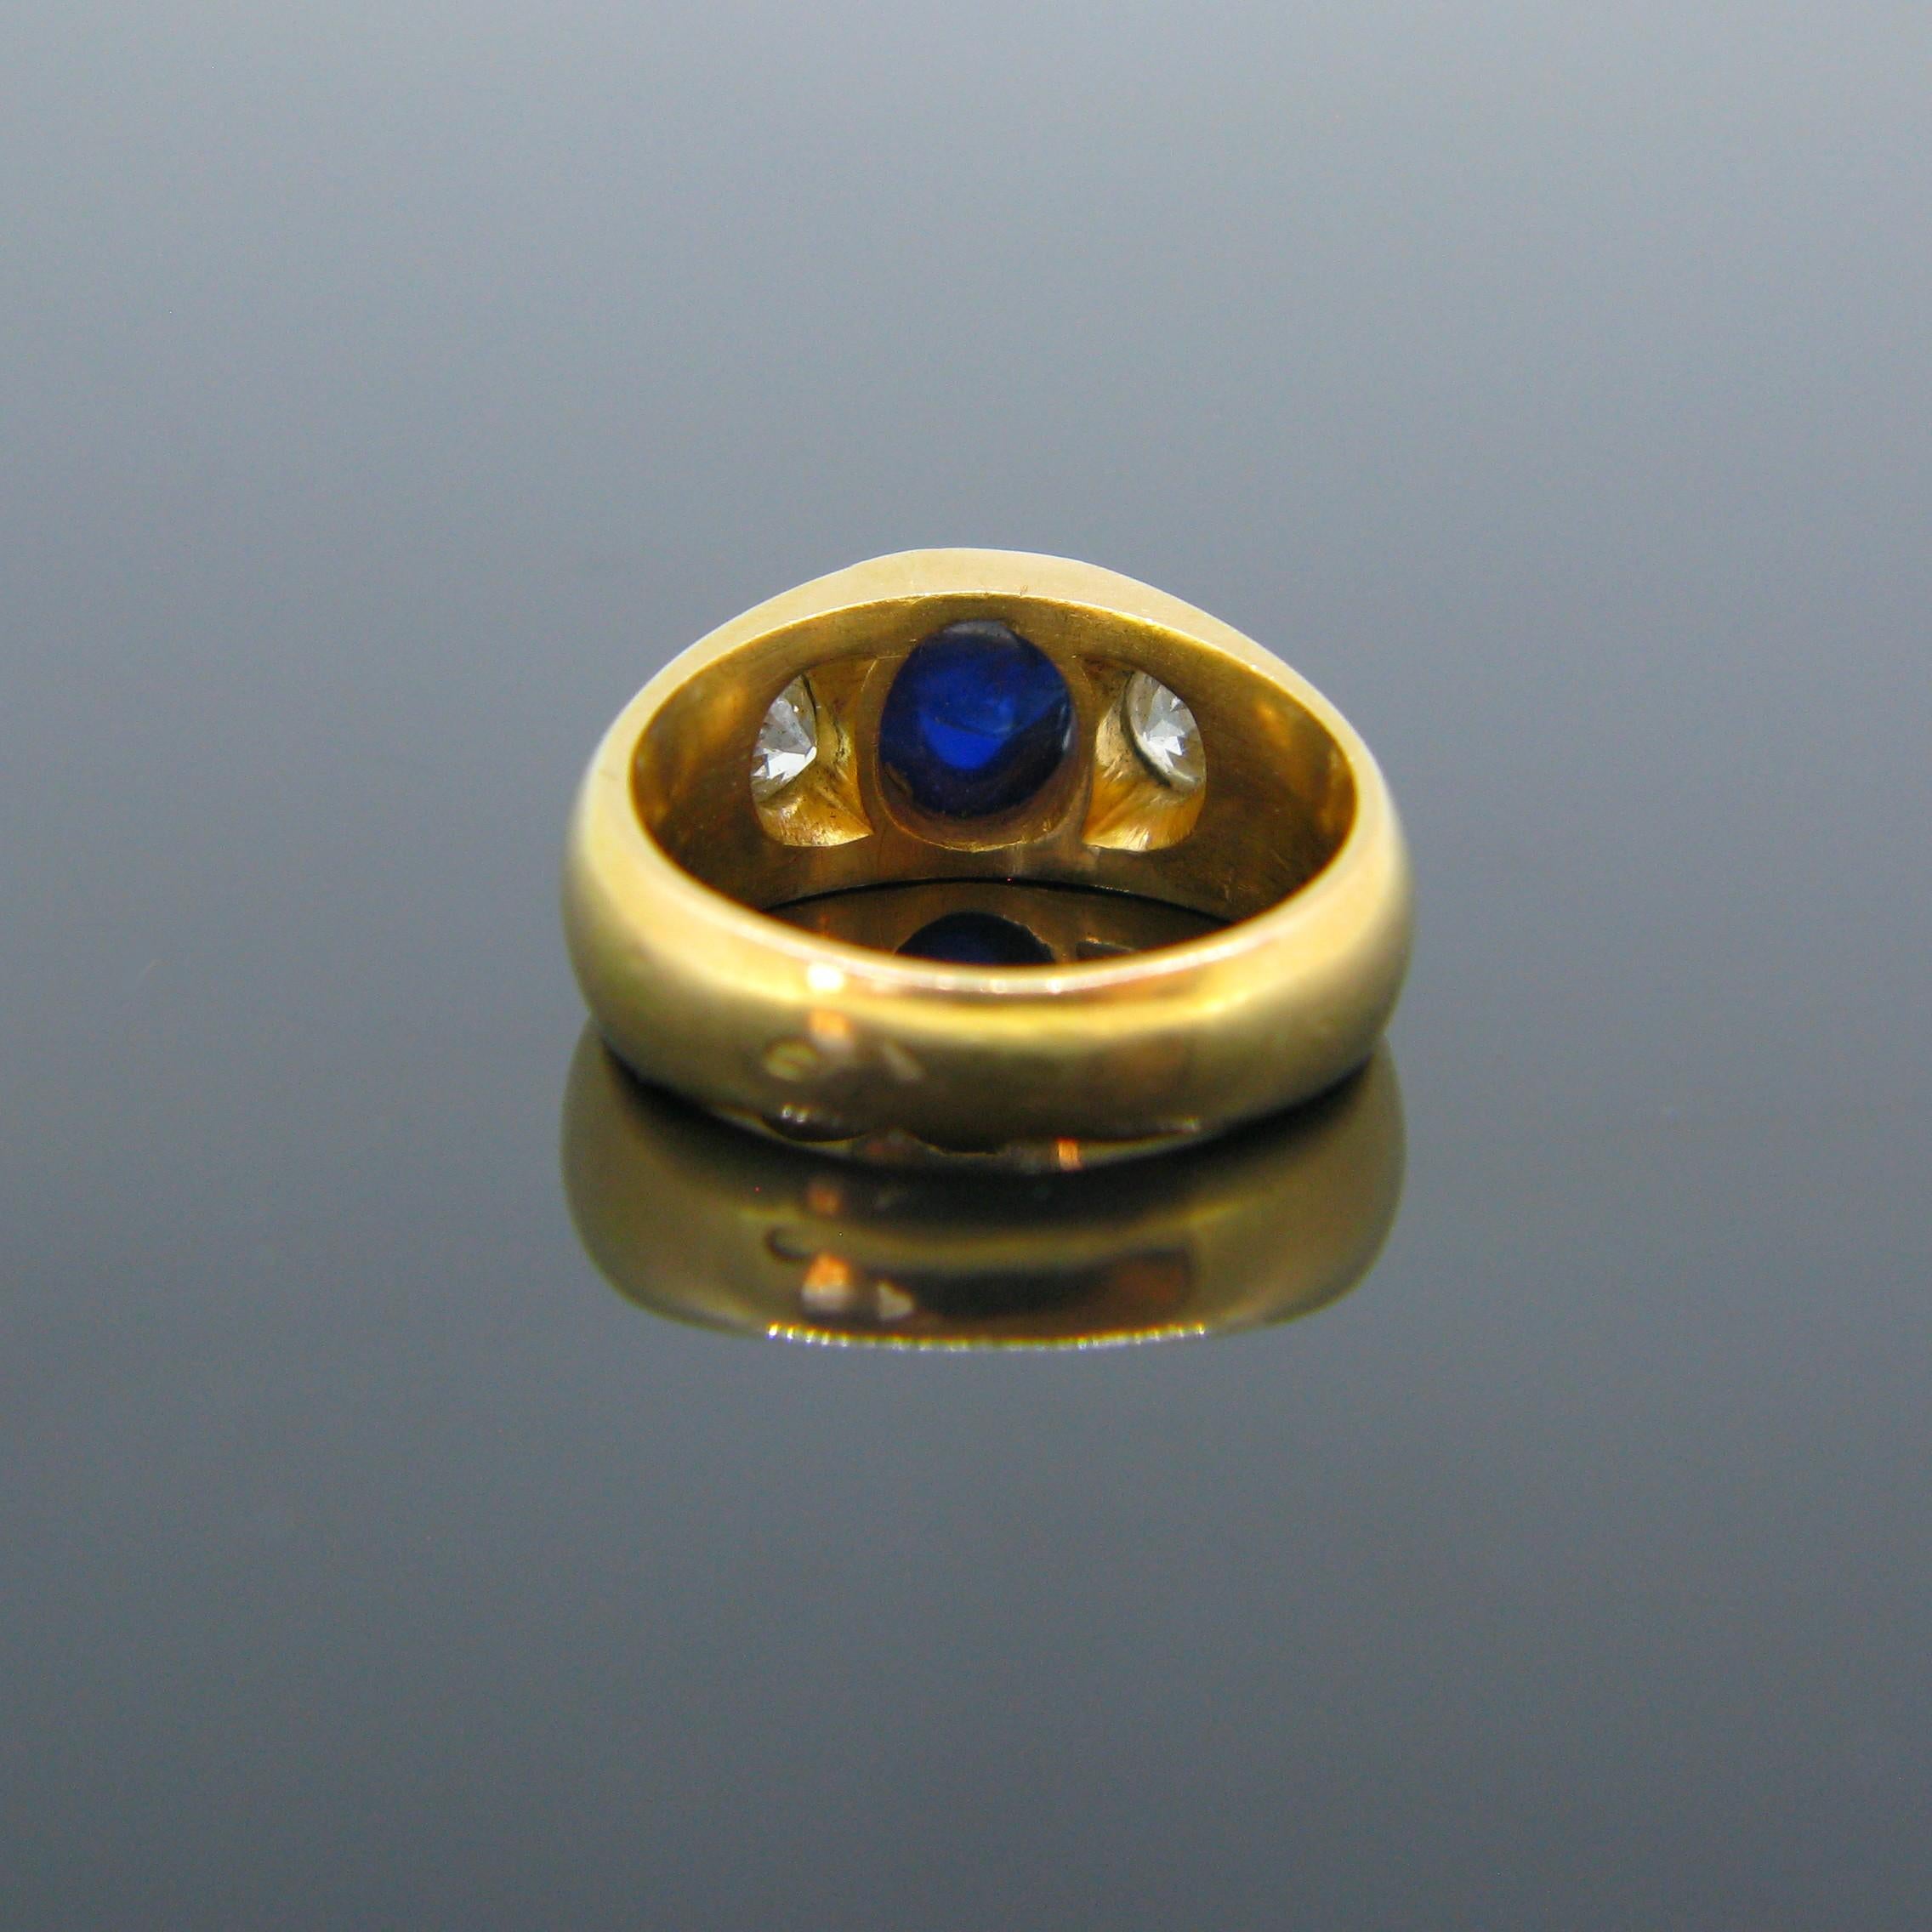 Retro Vintage 1930s Cabochon Sapphire and Old Cut Diamond Gypsy Yellow Gold Ring